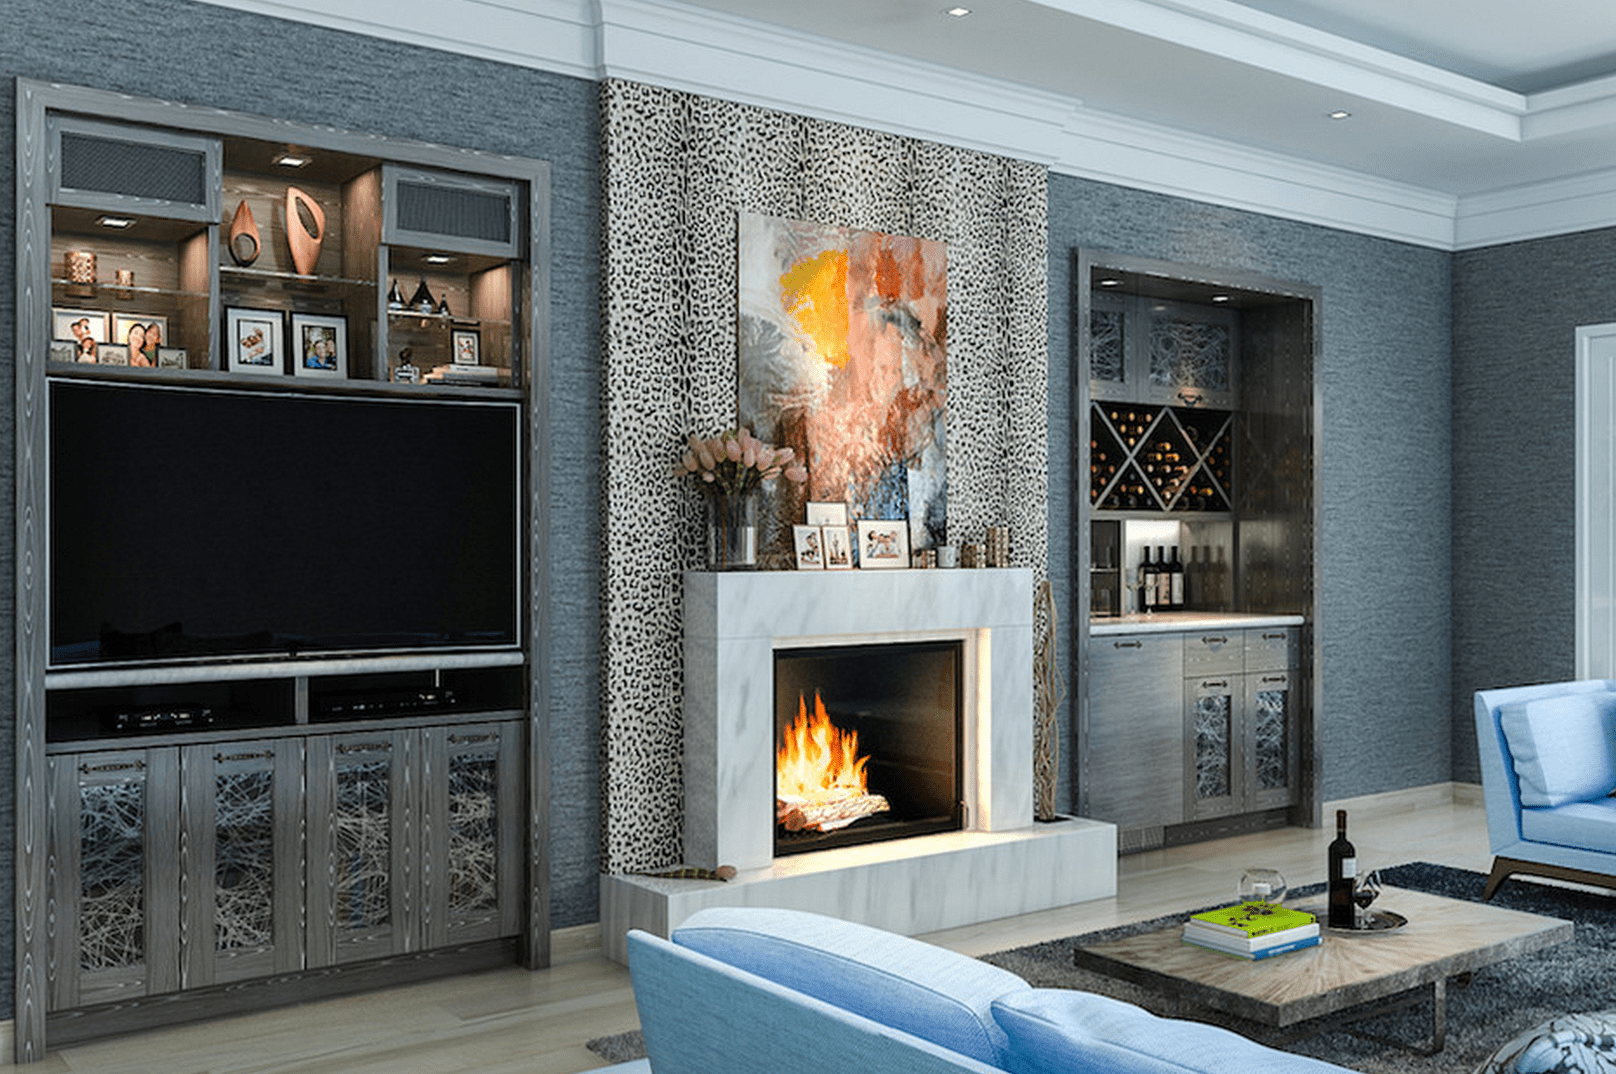 Floating Entertainment Center with Fireplace Beautiful Beautiful Living Rooms with Built In Shelving